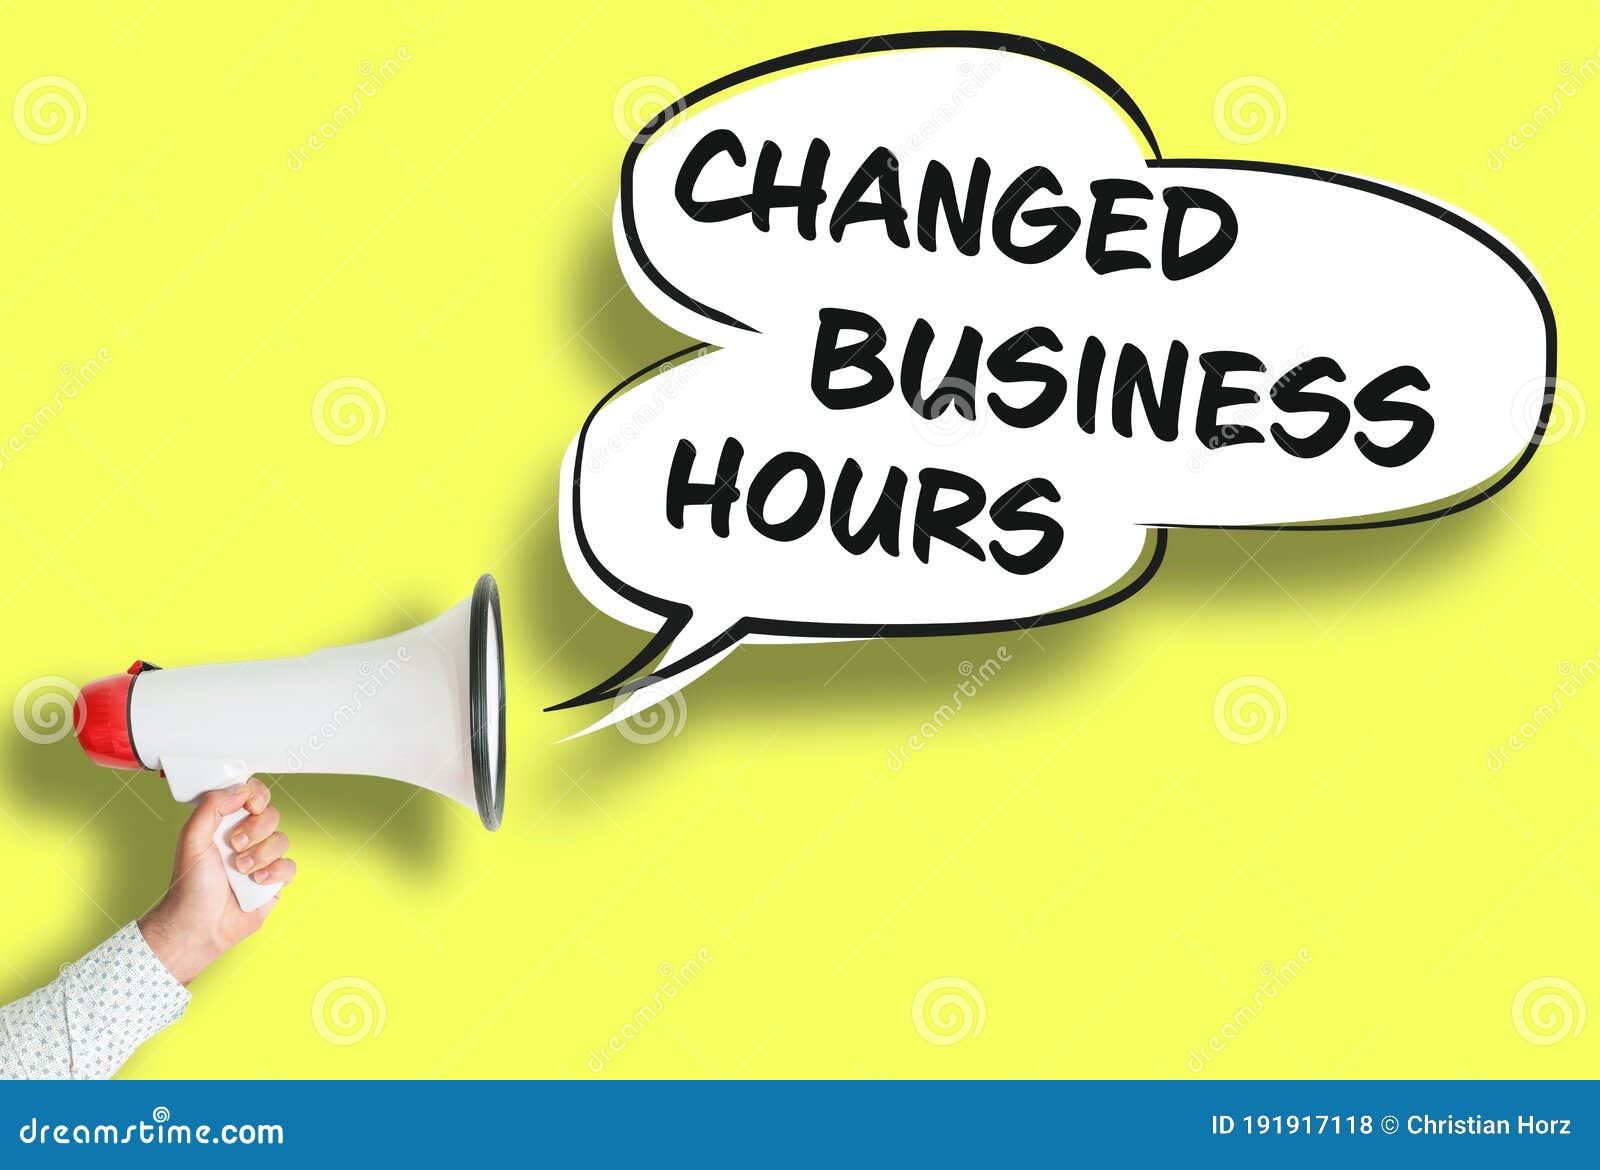 changed business hours poster or sign with megaphone and speech bubble